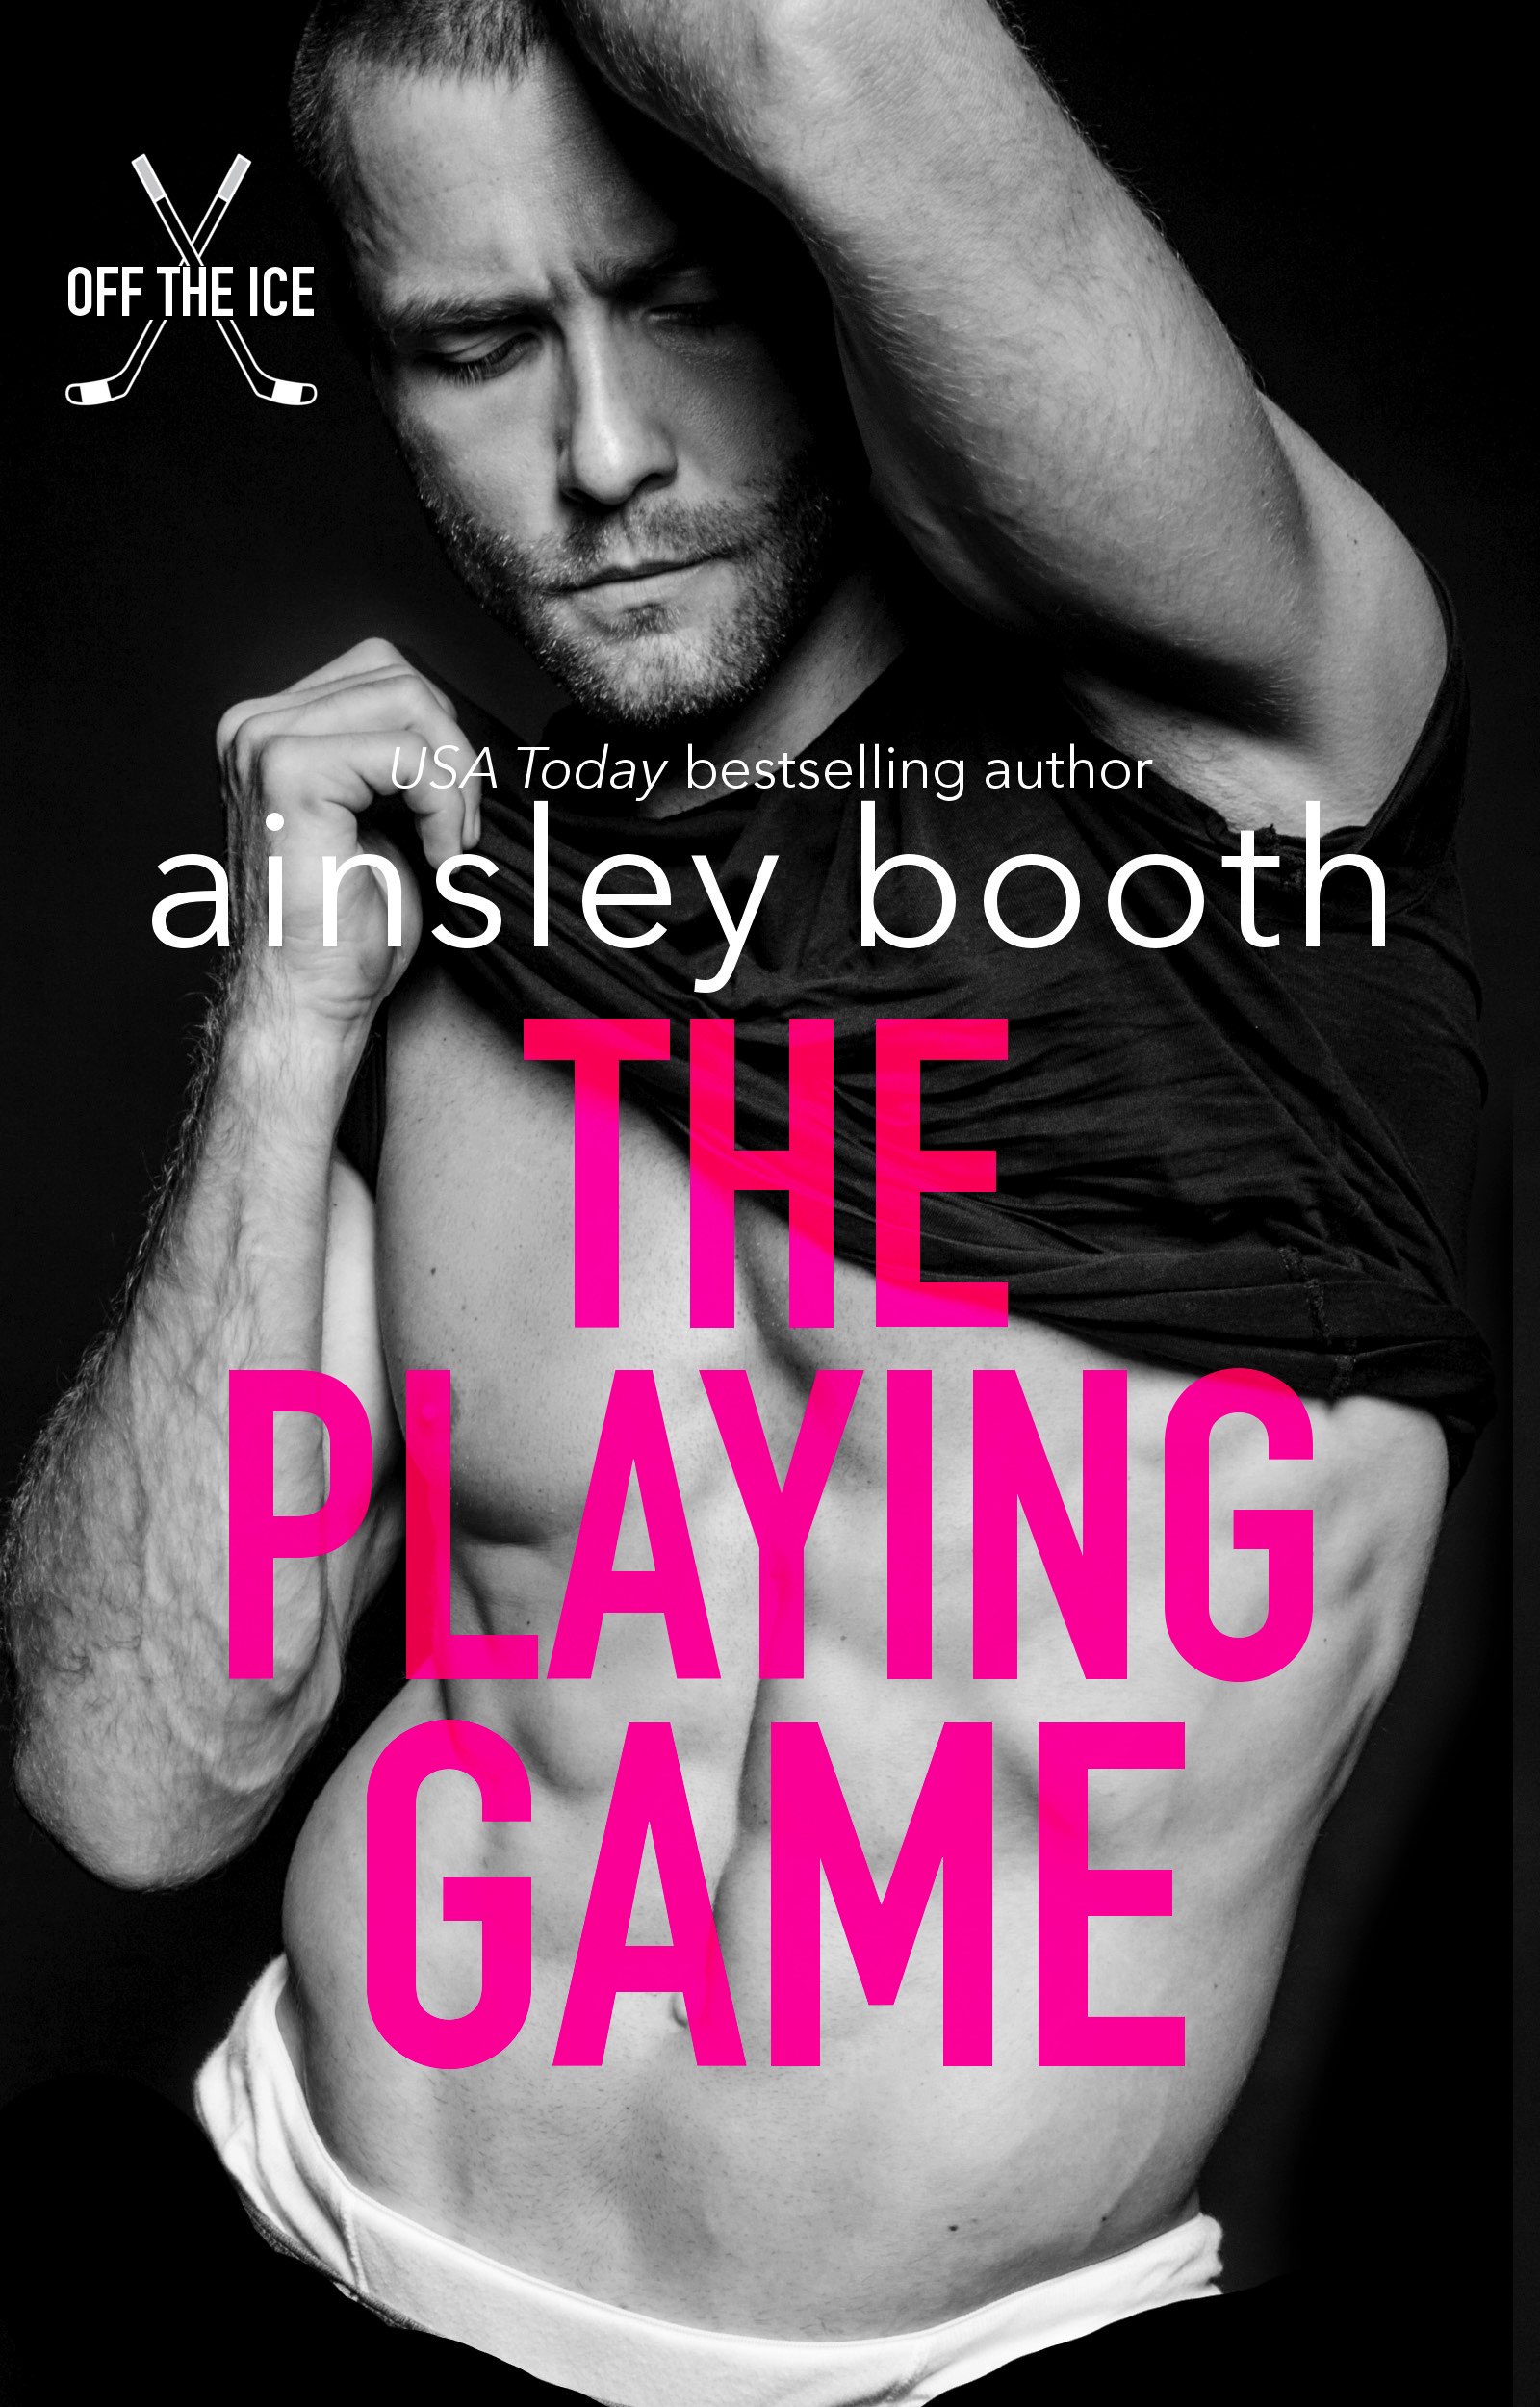 The Playing Game book cover